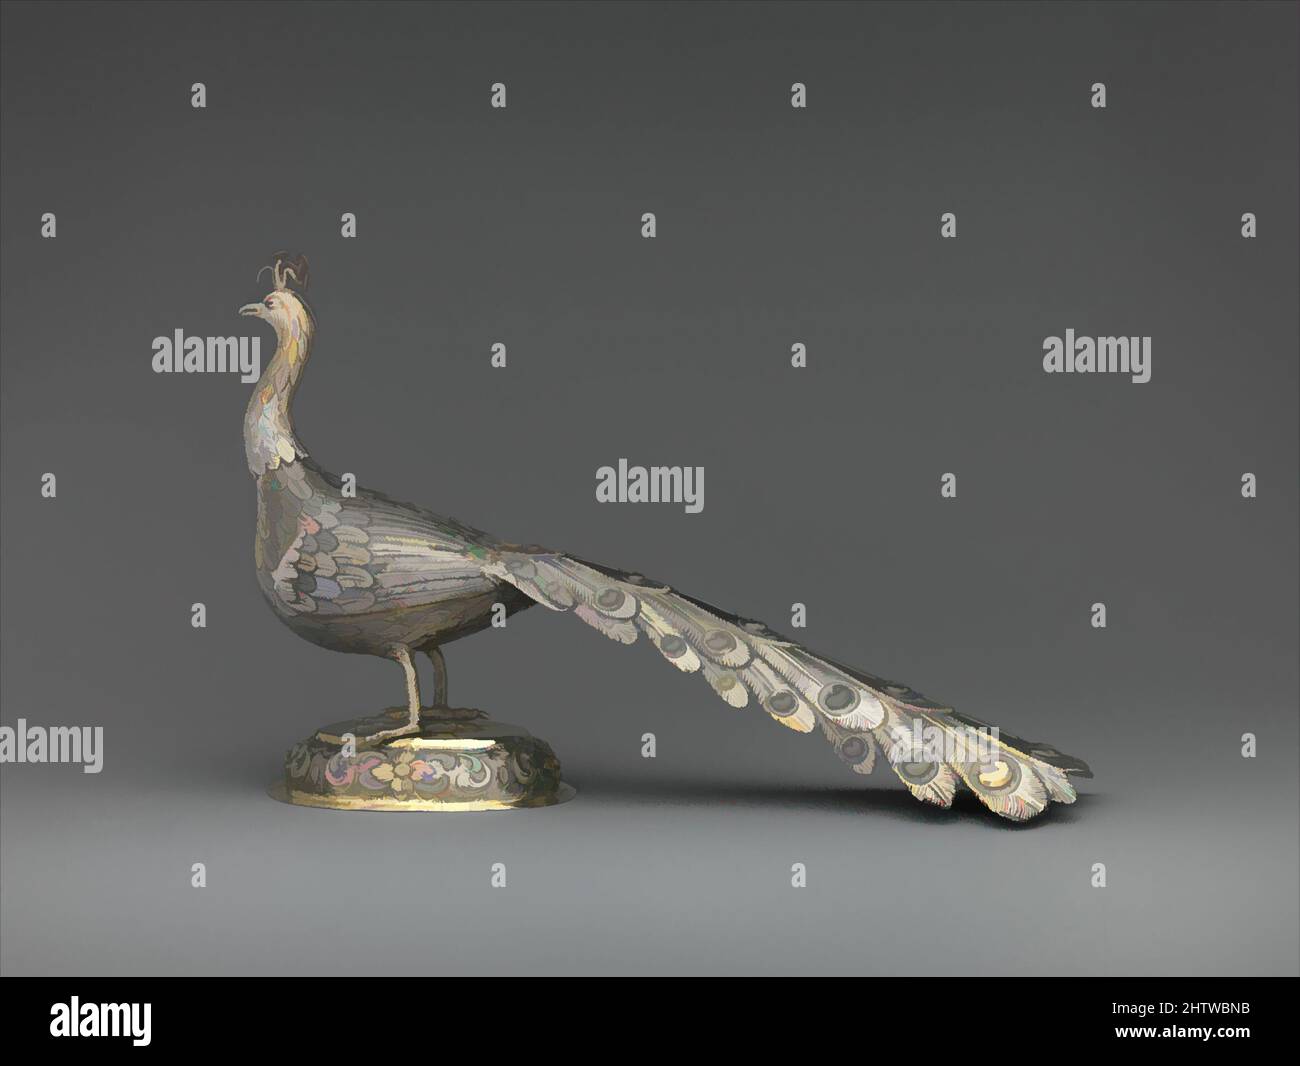 Art inspired by Table decoration in the form of a peacock, 1787, Hungarian, Munkács, Silver, partly gilded, Overall: 7 3/16 x 12 in. (18.3 x 30.5 cm), Metalwork-Silver, The peacock stands with its head slightly tilted, mischievously observing his surroundings. The artist has capture in, Classic works modernized by Artotop with a splash of modernity. Shapes, color and value, eye-catching visual impact on art. Emotions through freedom of artworks in a contemporary way. A timeless message pursuing a wildly creative new direction. Artists turning to the digital medium and creating the Artotop NFT Stock Photo